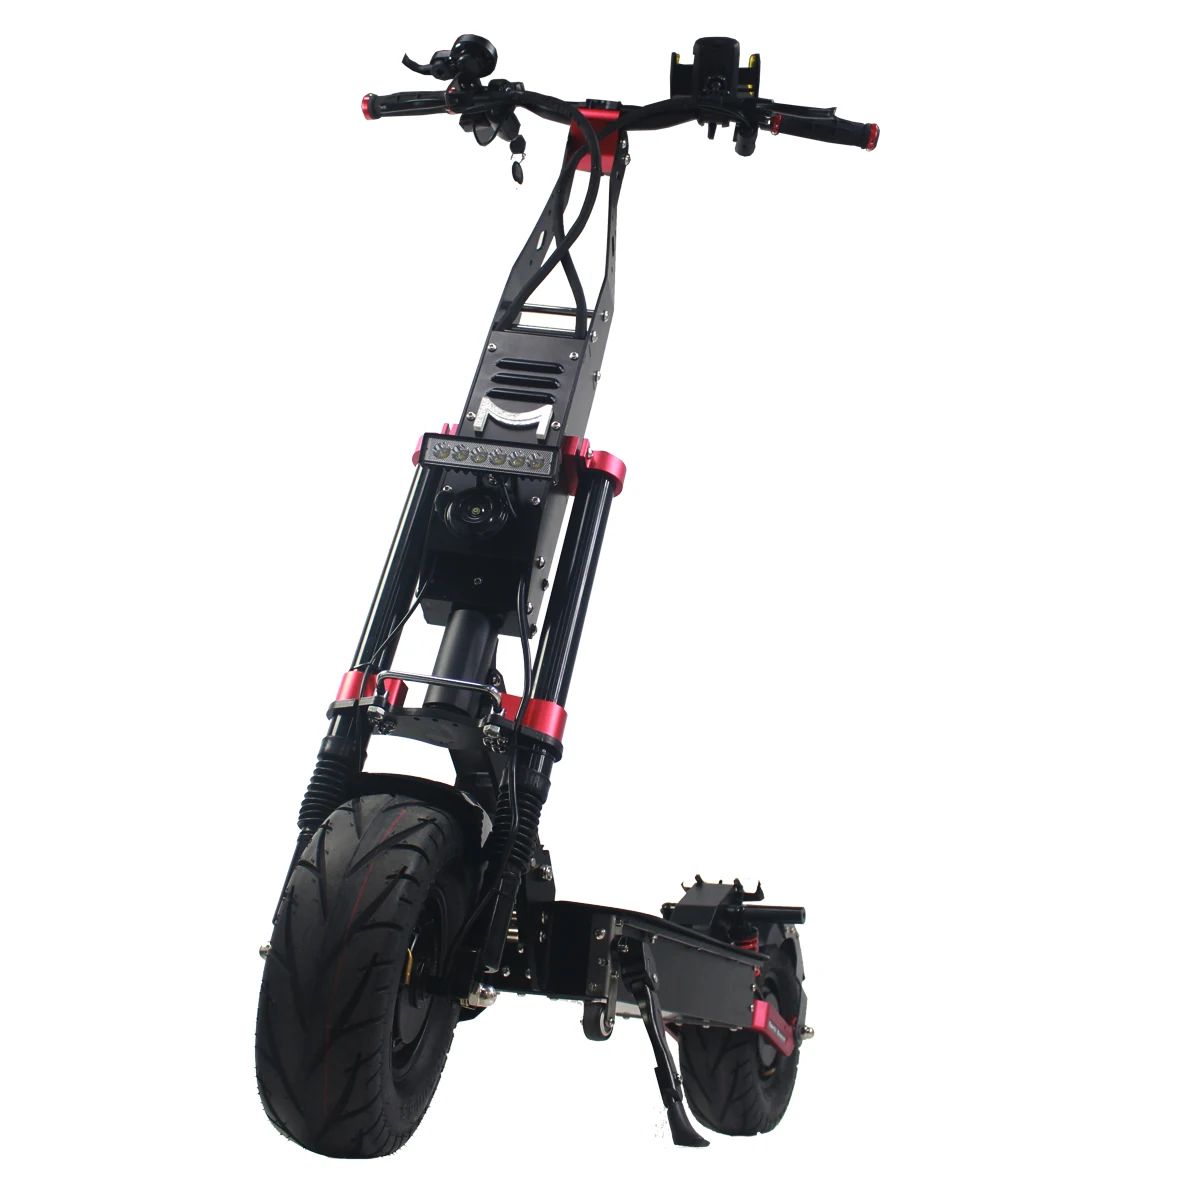 

Maike MK9x 60v 7200w scooter dual motor fat wheel scooter powerful dropship electric scooter fast, Black+red